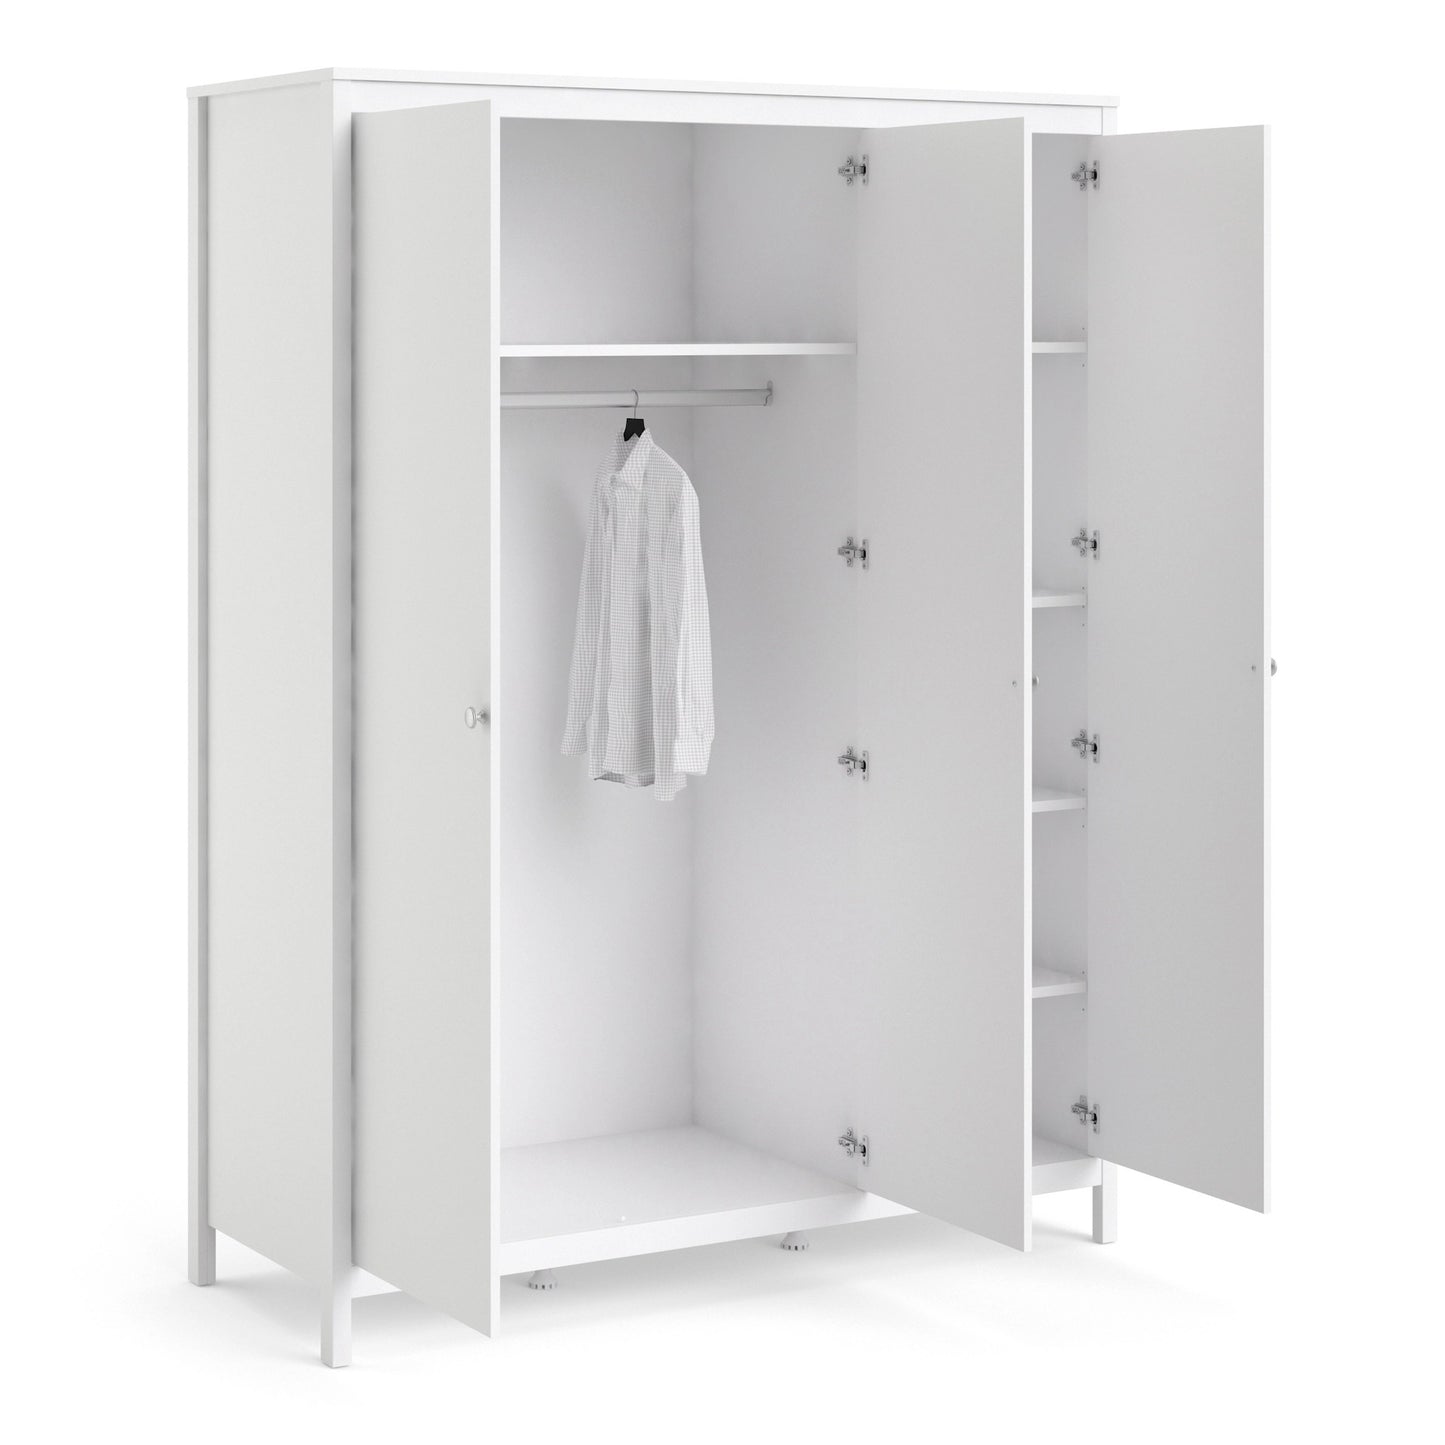 Furniture To Go Madrid Wardrobe with 3 Doors in White